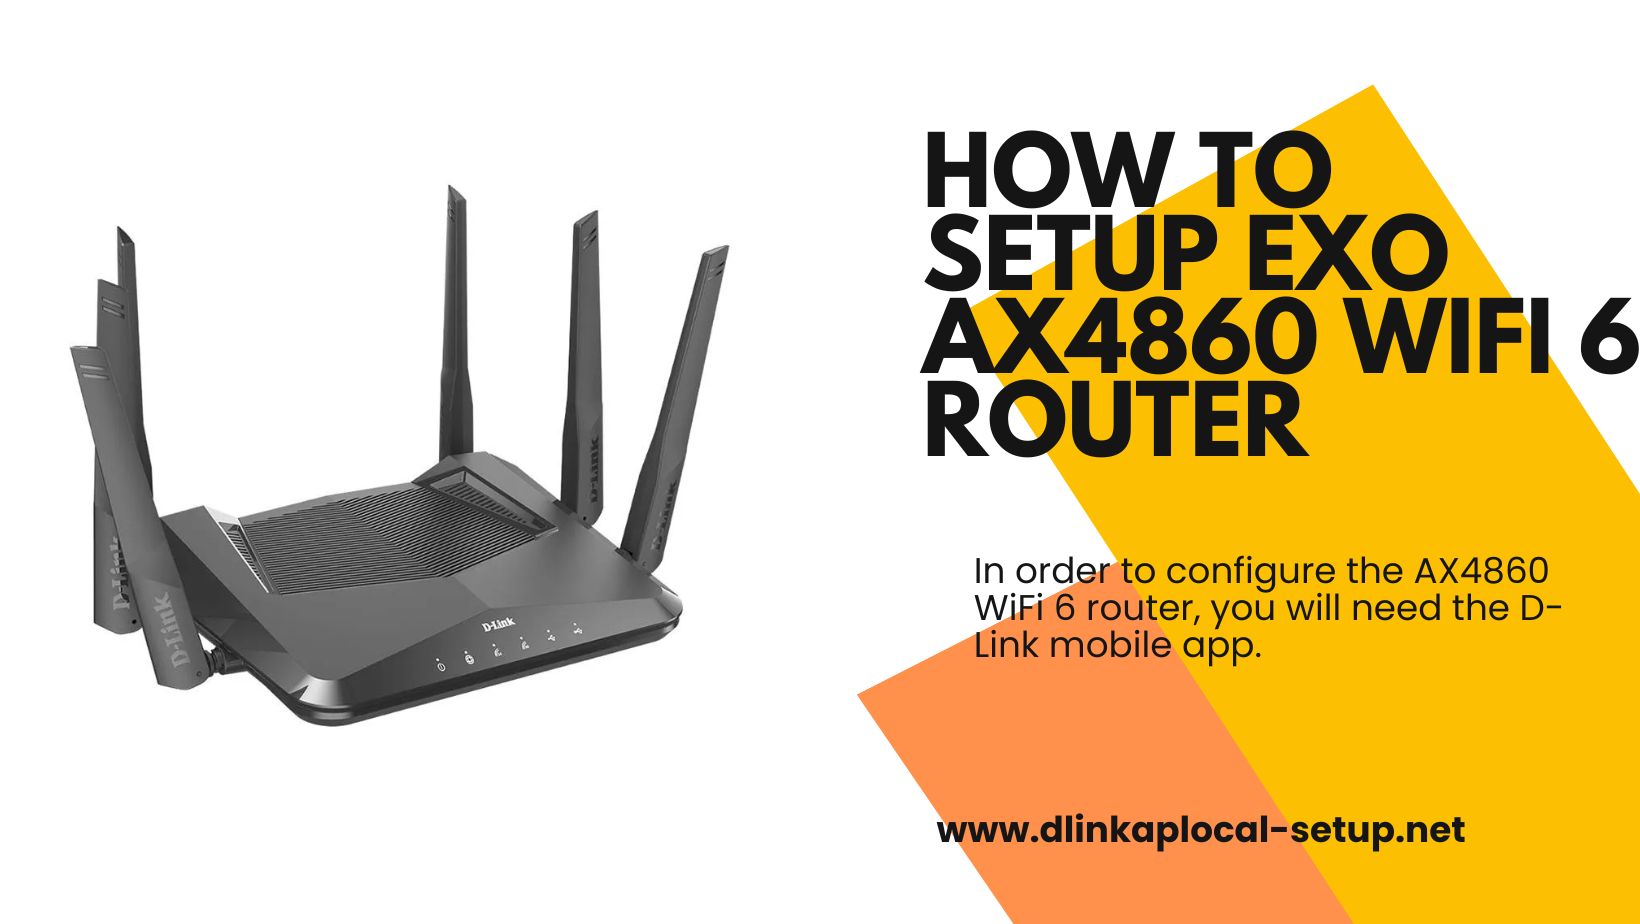 How to Setup EXO AX4860 WiFi 6 Router